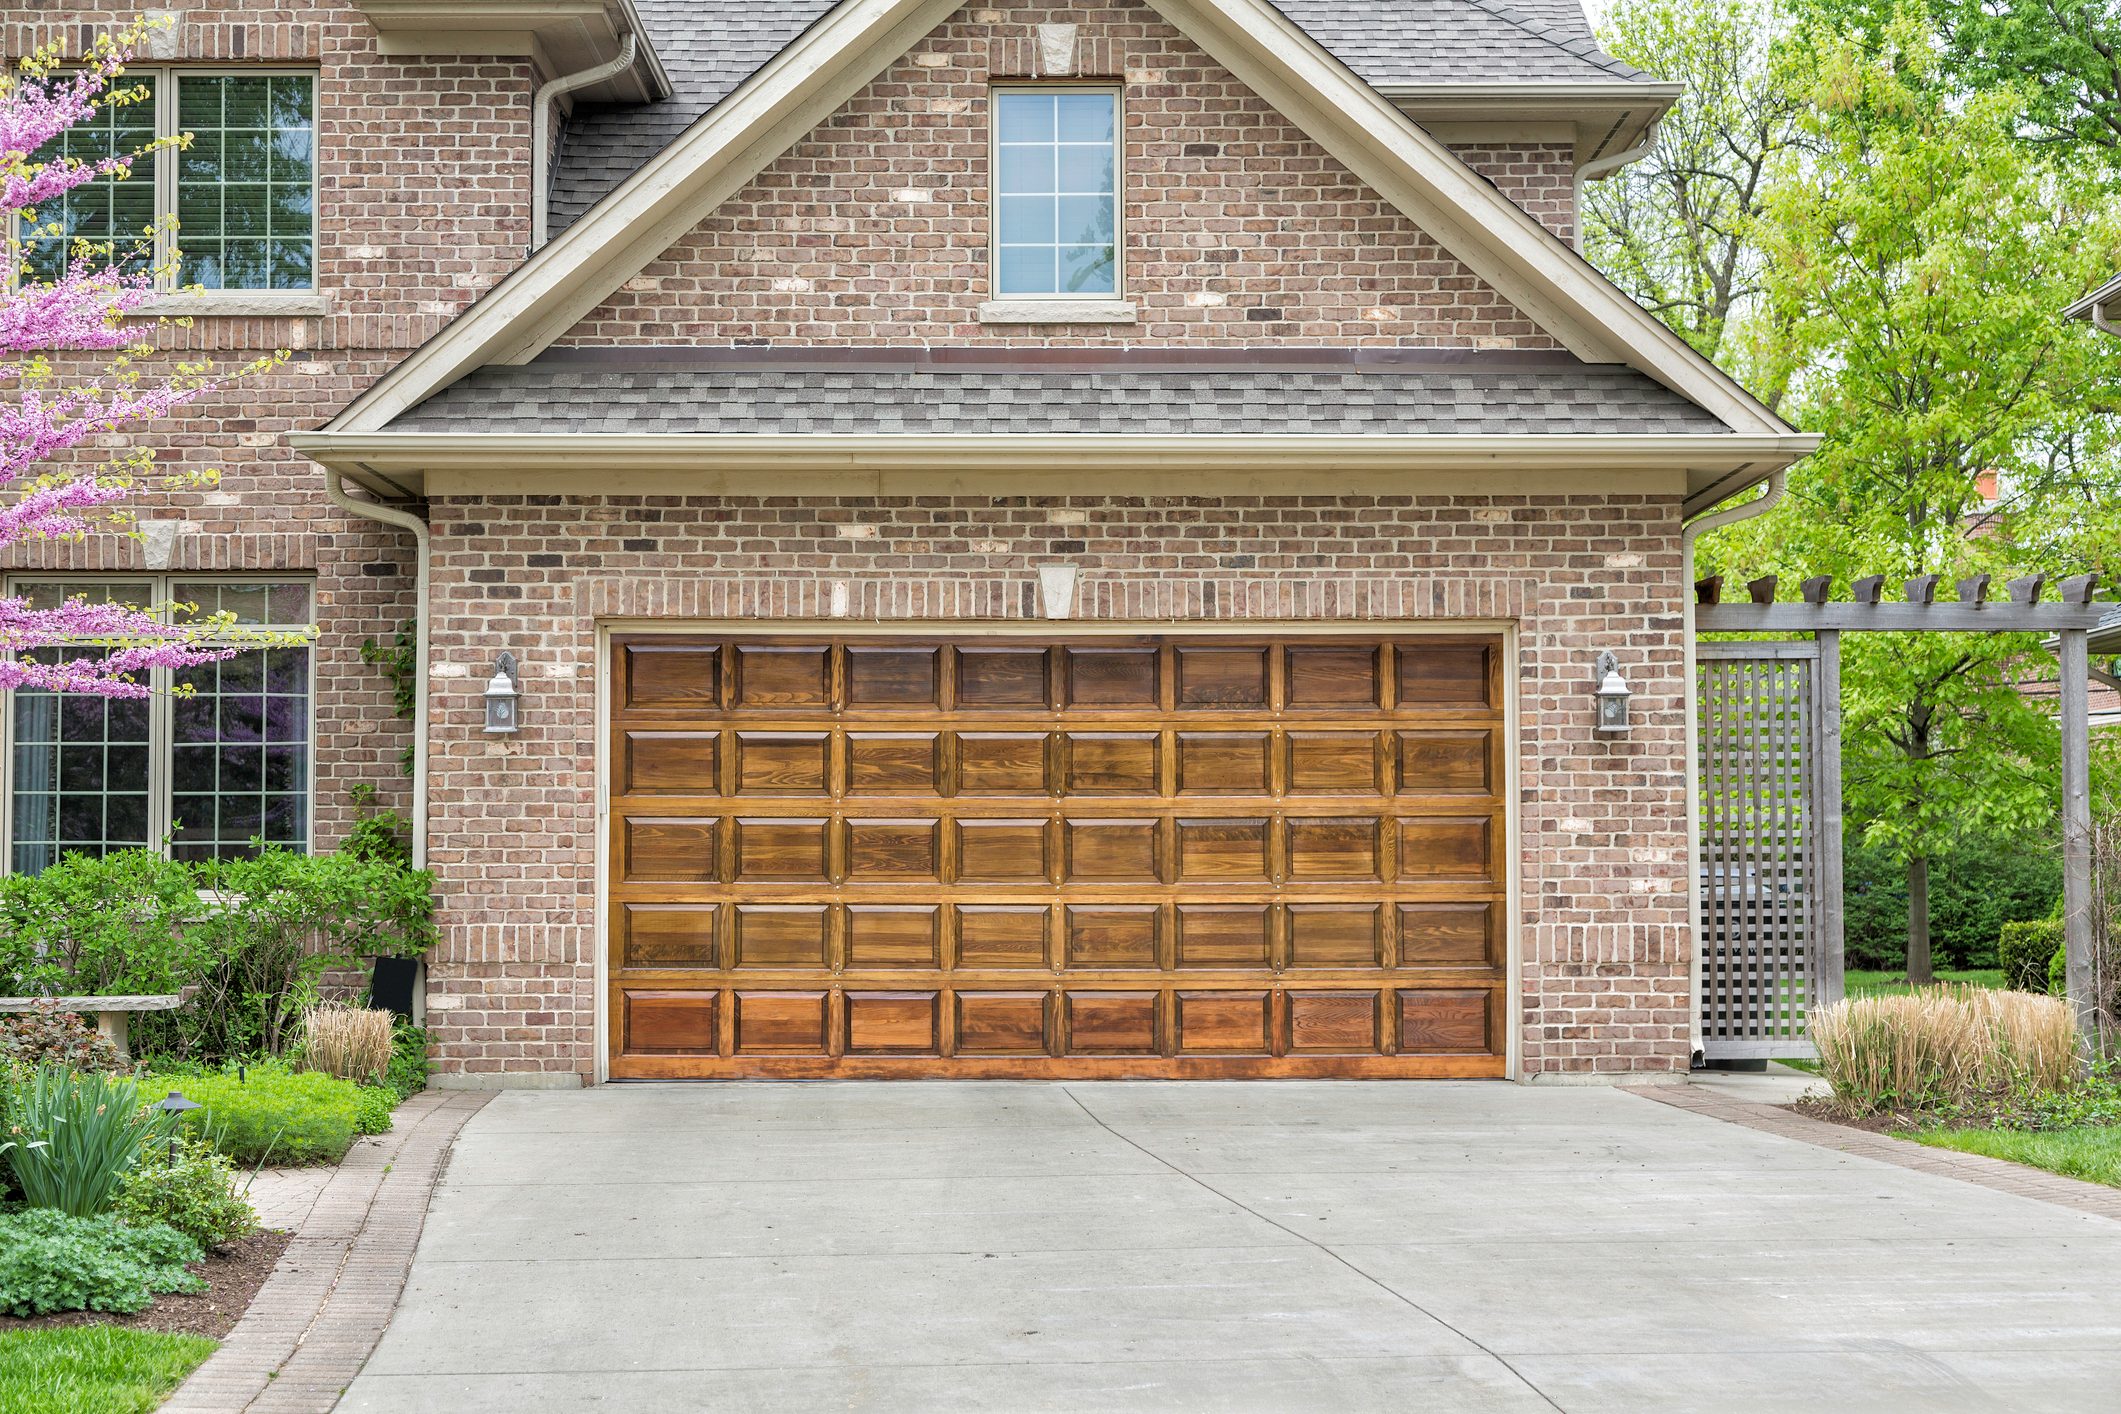 Wood Garage Doors: What To Consider Before Buying